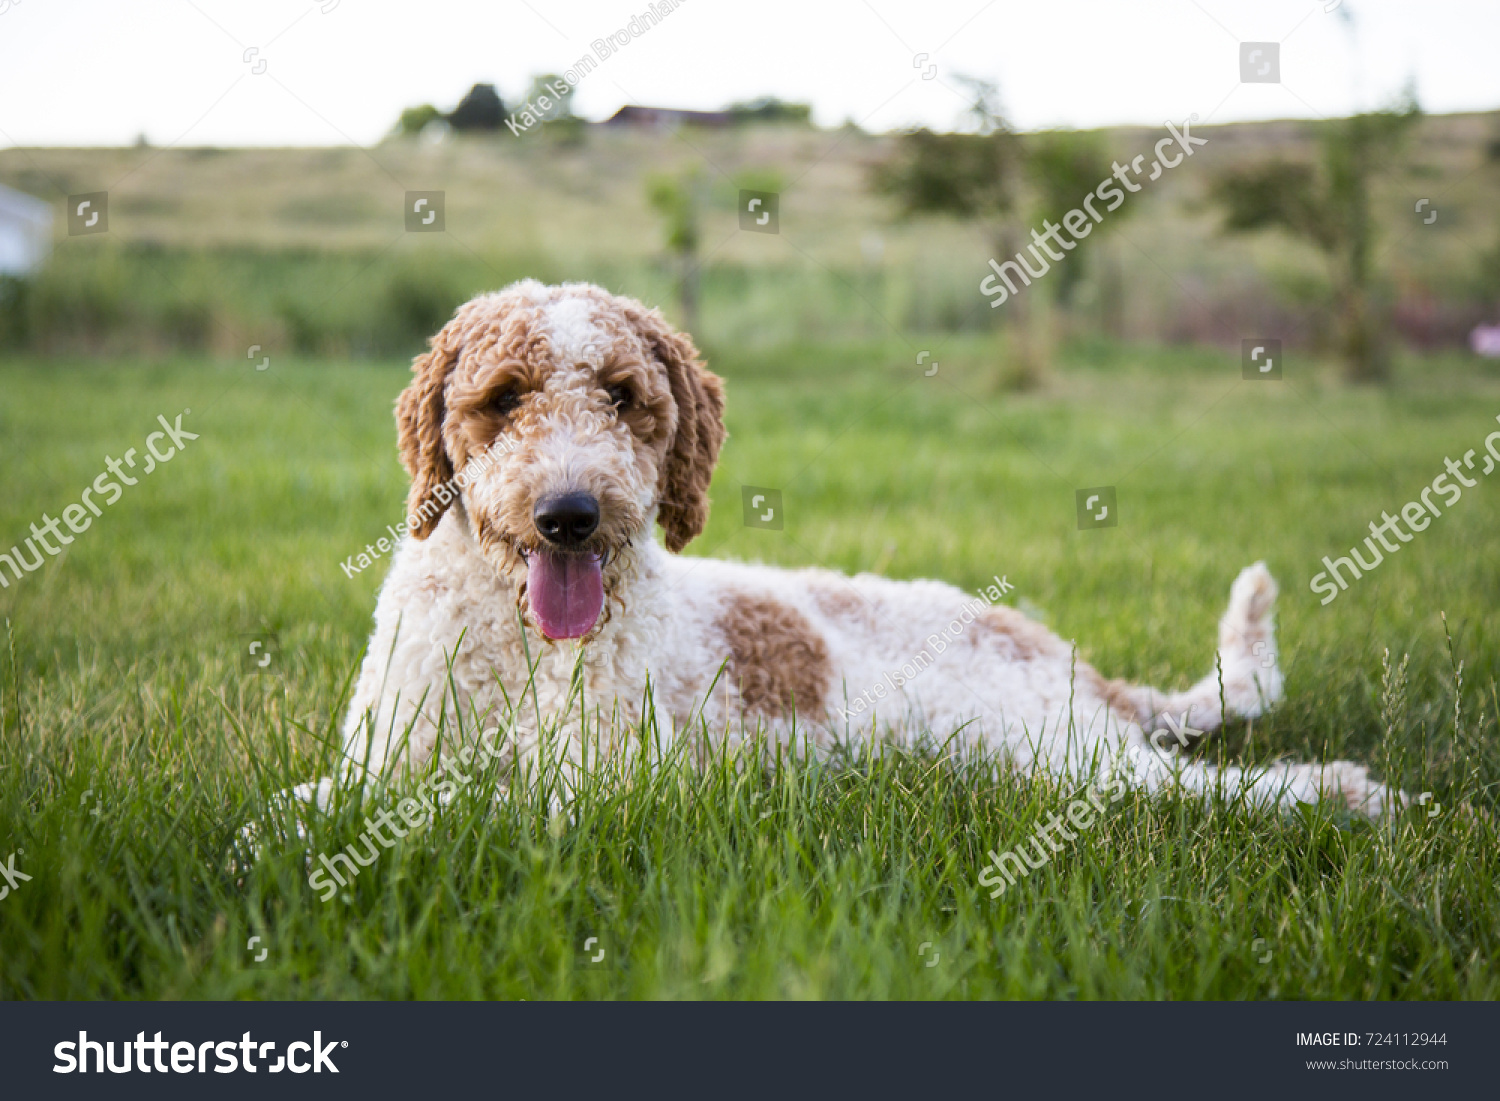 spotted goldendoodle